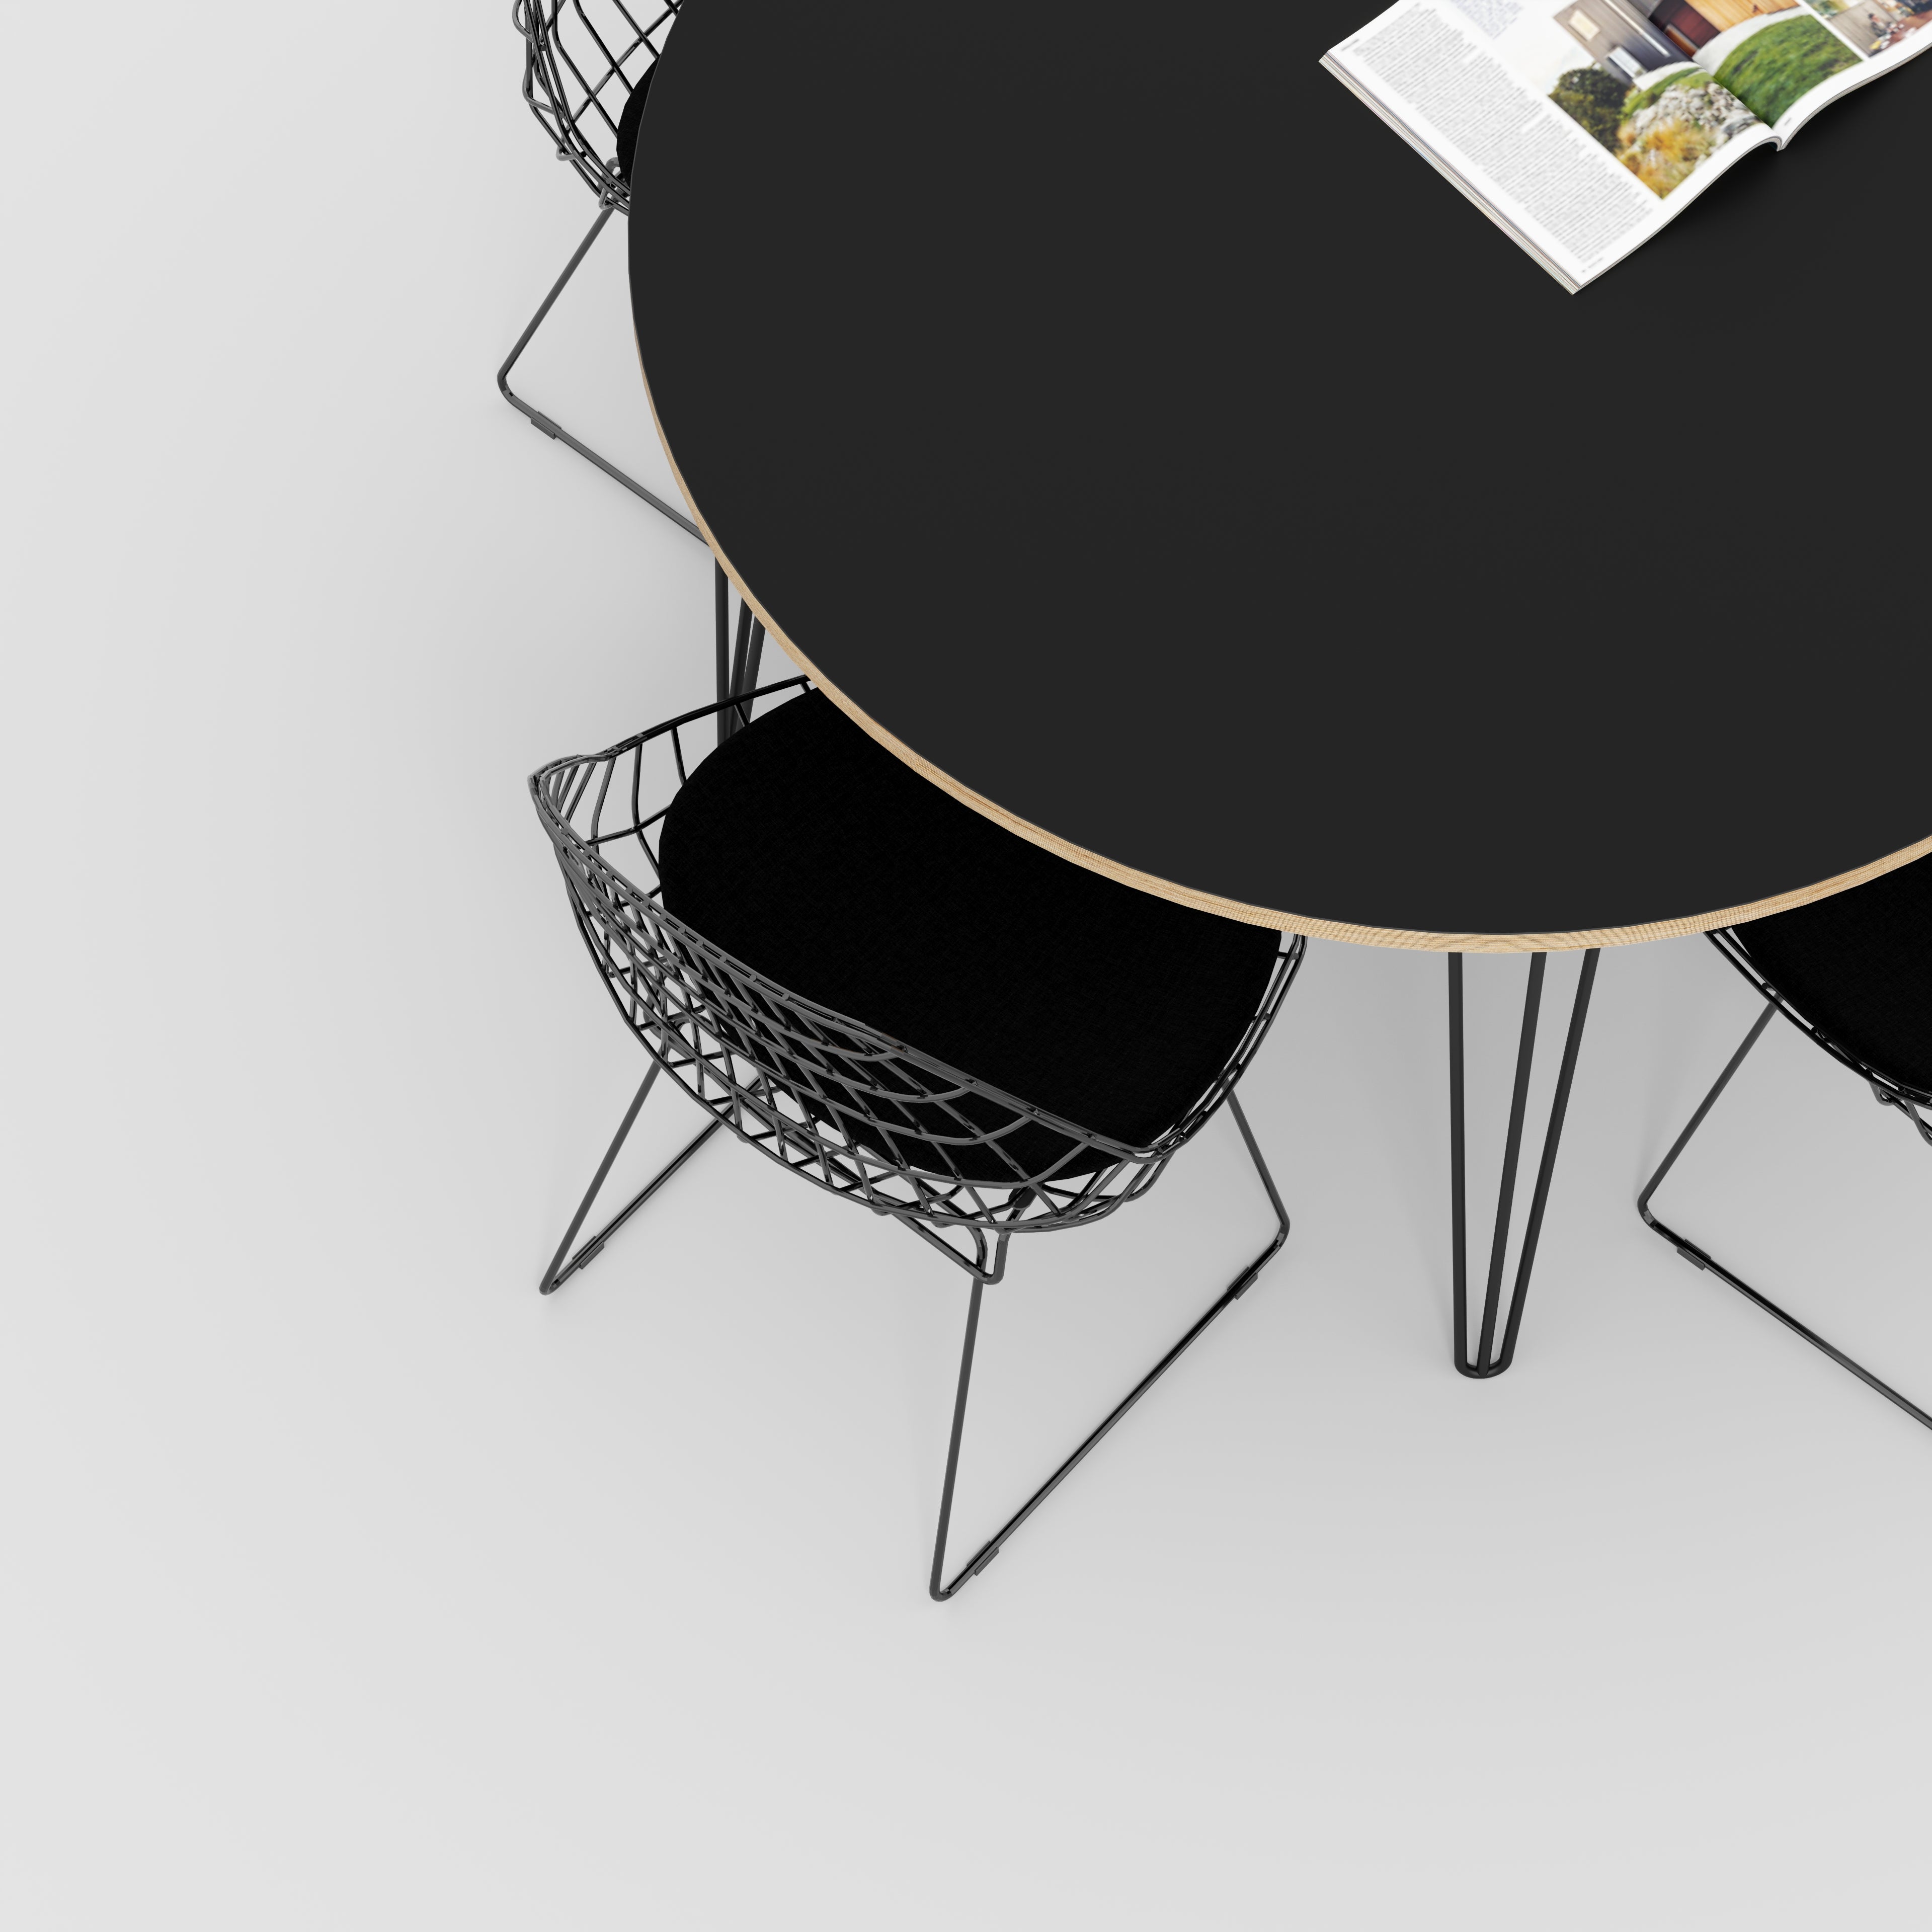 Round Table with Black Hairpin Legs - Formica Diamond Black - 1200(dia) x 735(h)